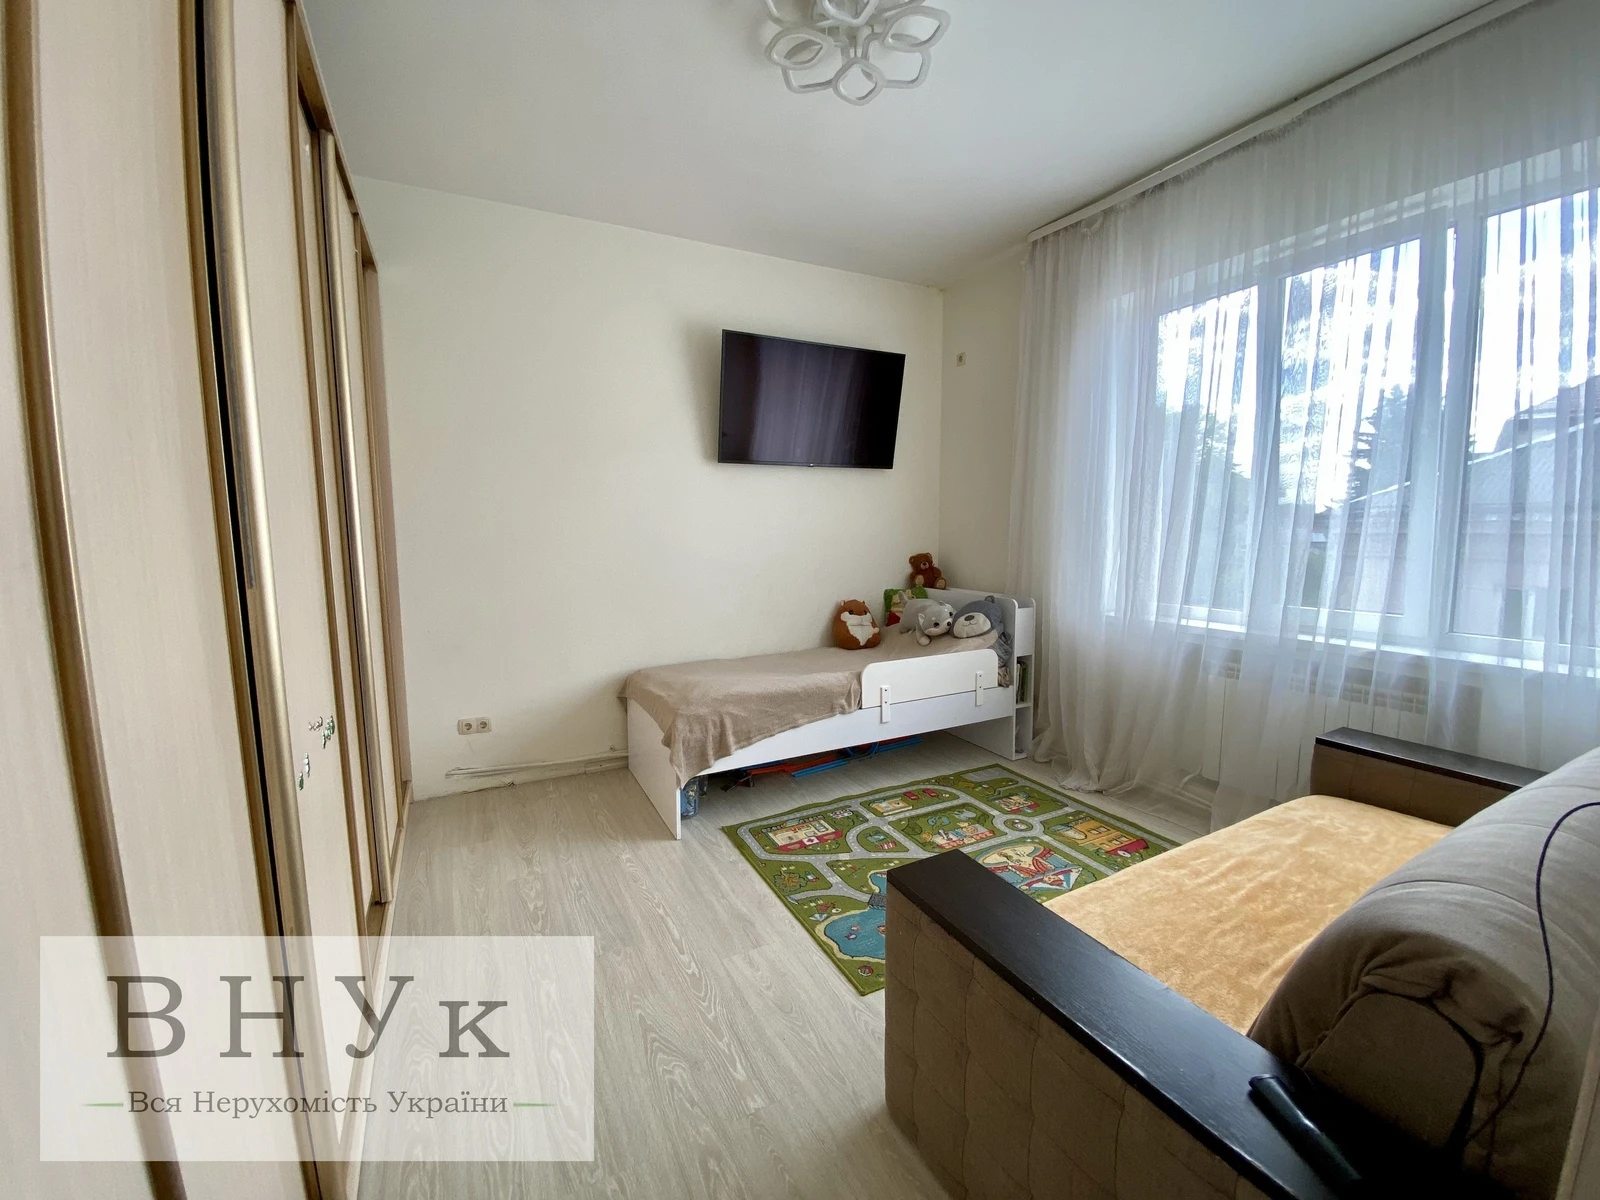 Apartments for sale. 4 rooms, 102 m², 3rd floor/4 floors. Bandery S. vul., Ternopil. 